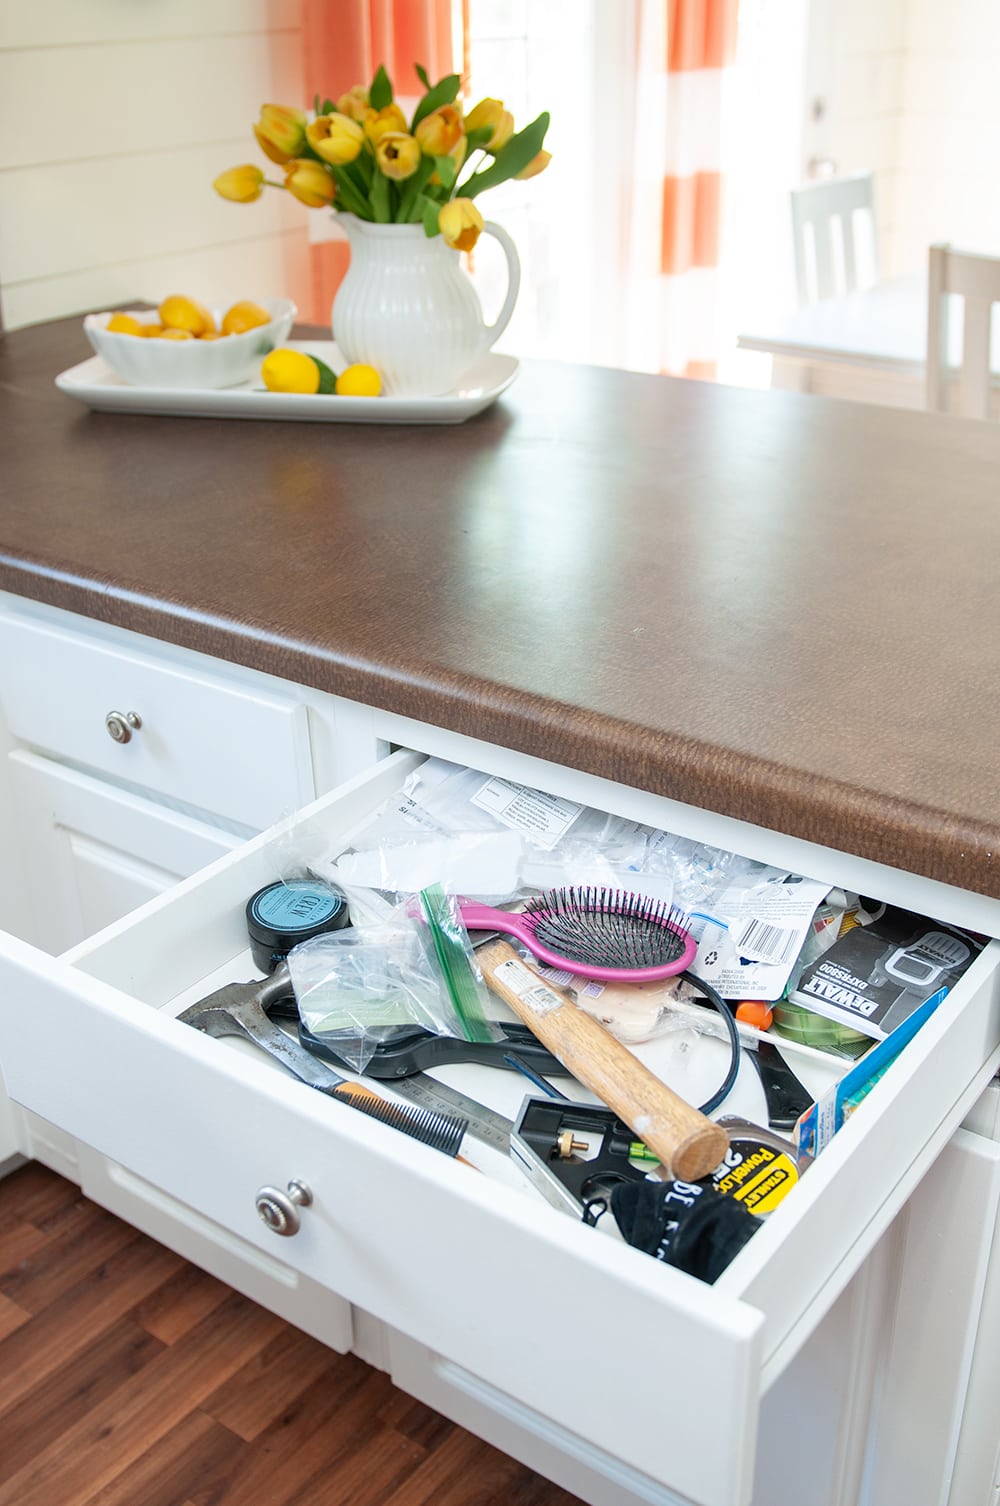 Cabinet and Drawer Liner Makeover with Duck Tape®